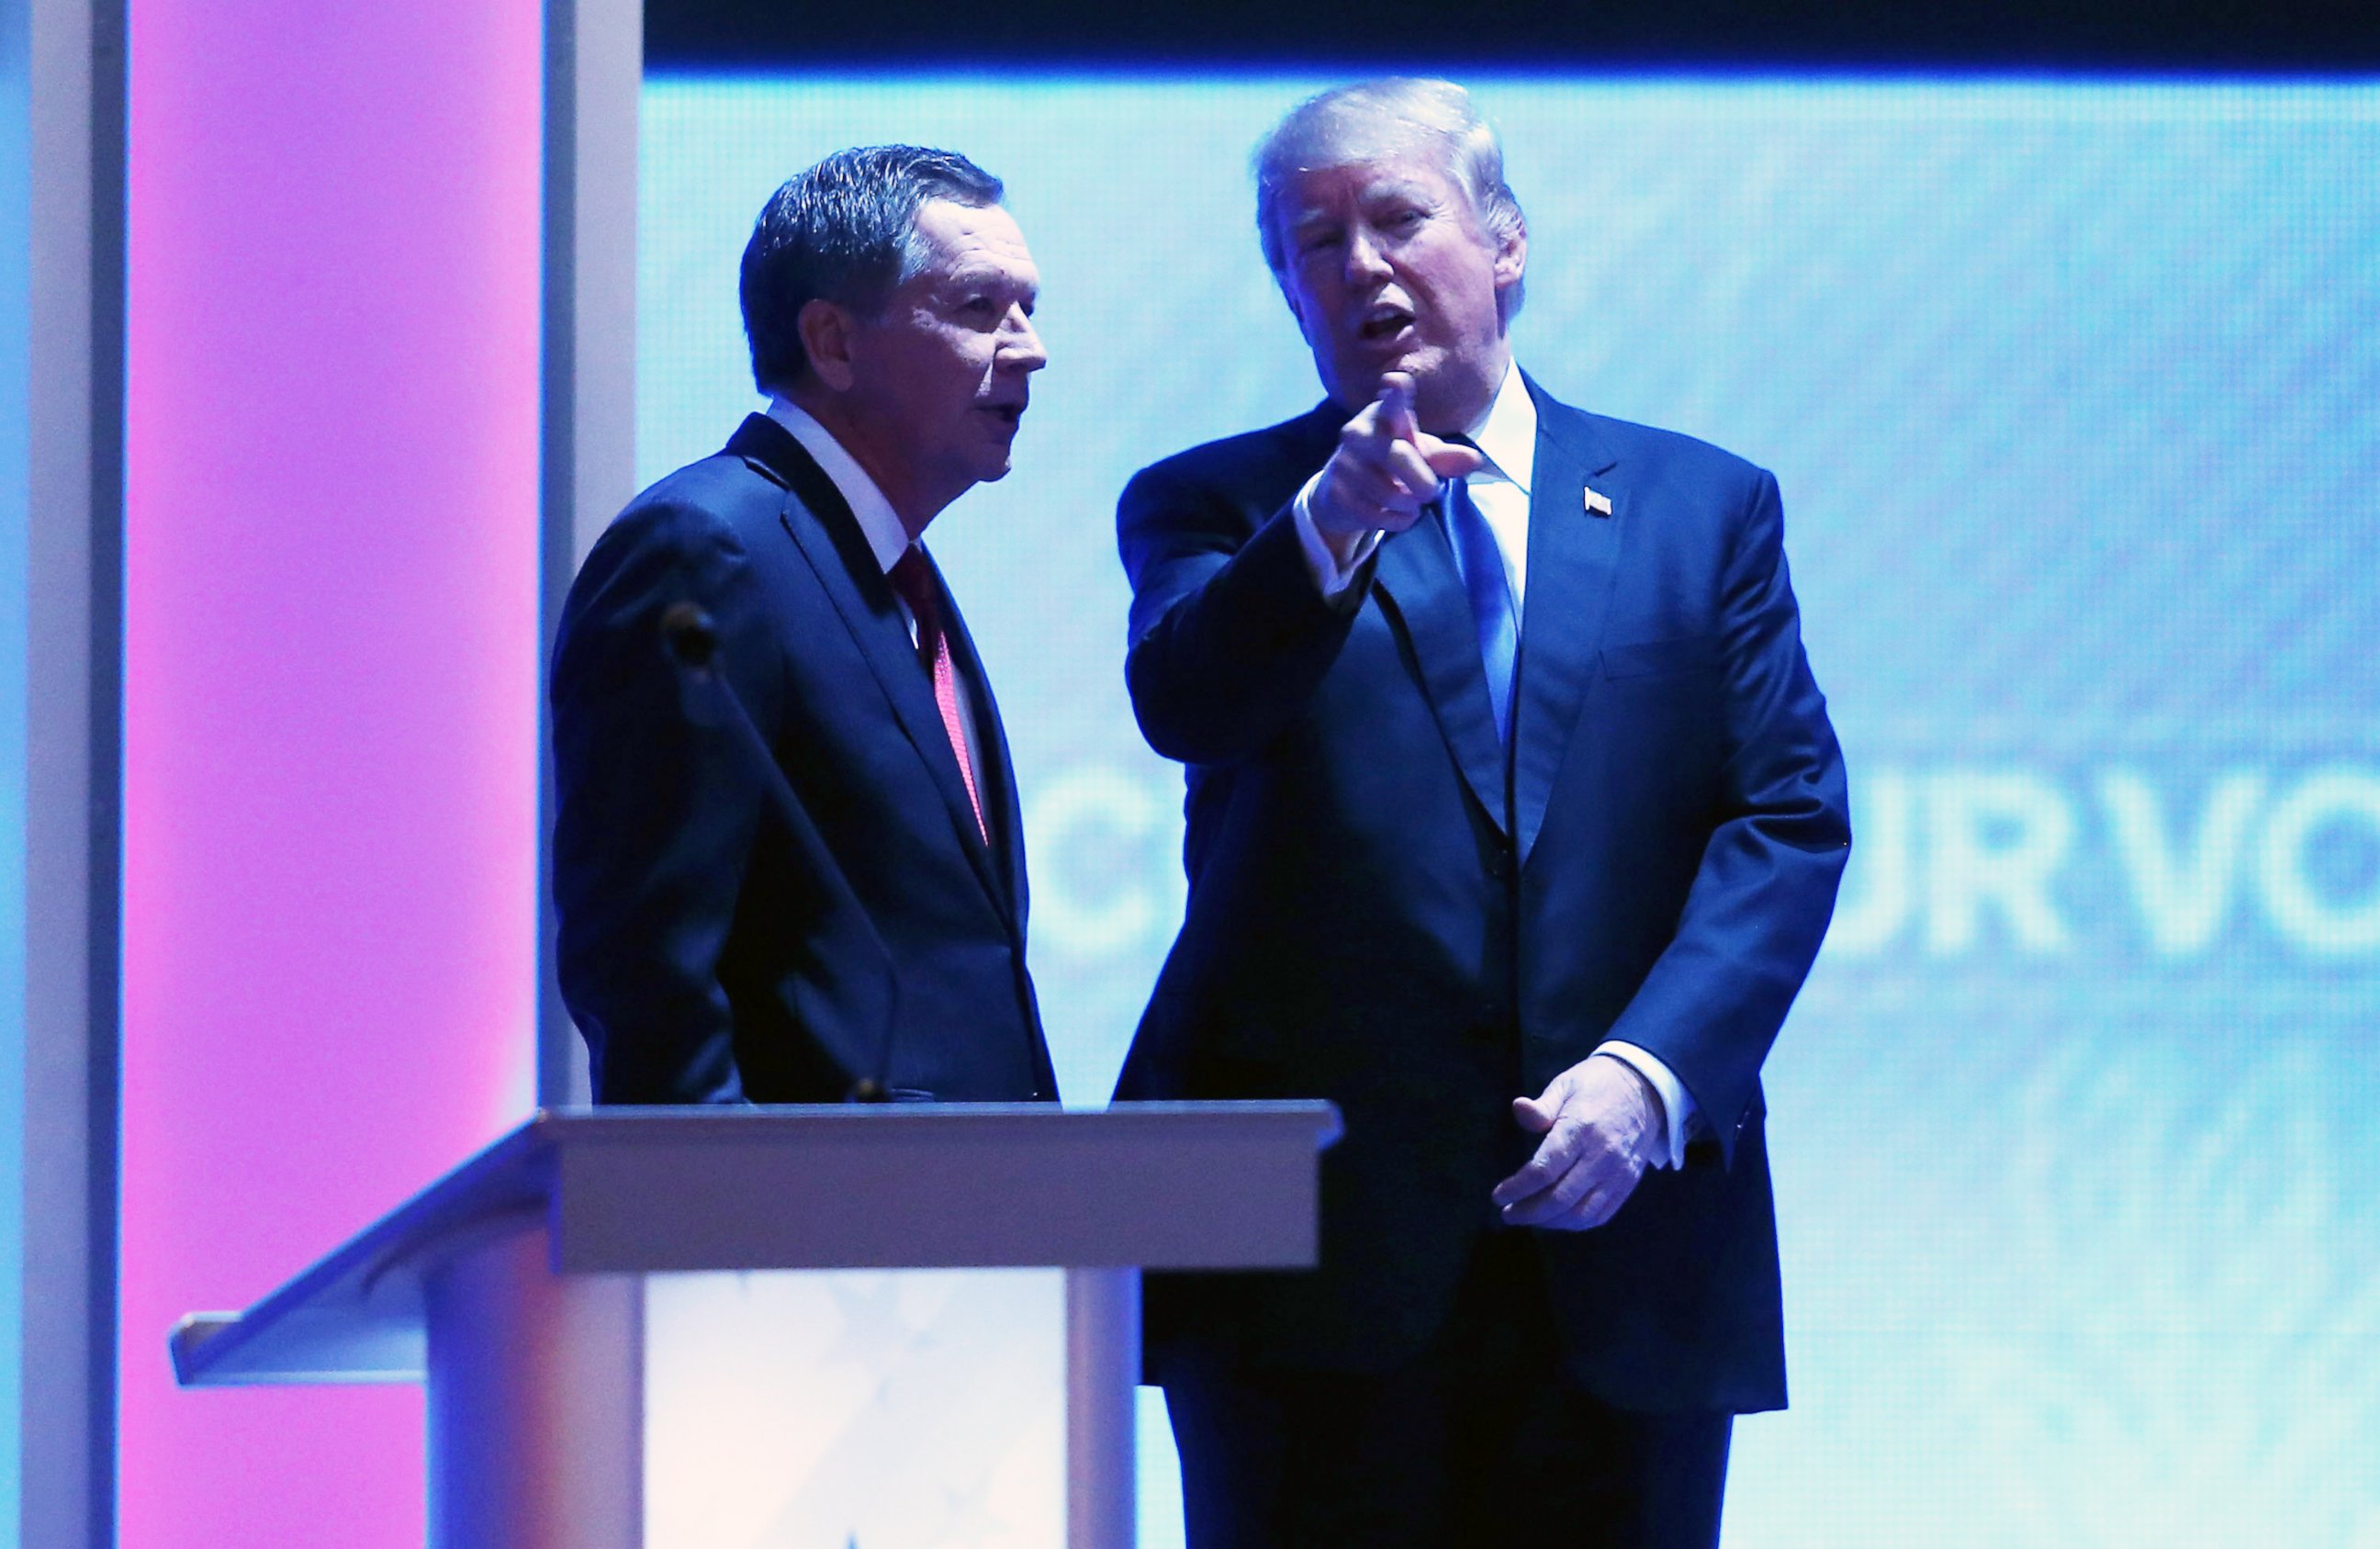 PHOTO:John Kasich and Donald Trump talk during a commercial break at the Republican presidential debate at St. Anselm College, Feb. 6, 2016, in Manchester, N.H.   